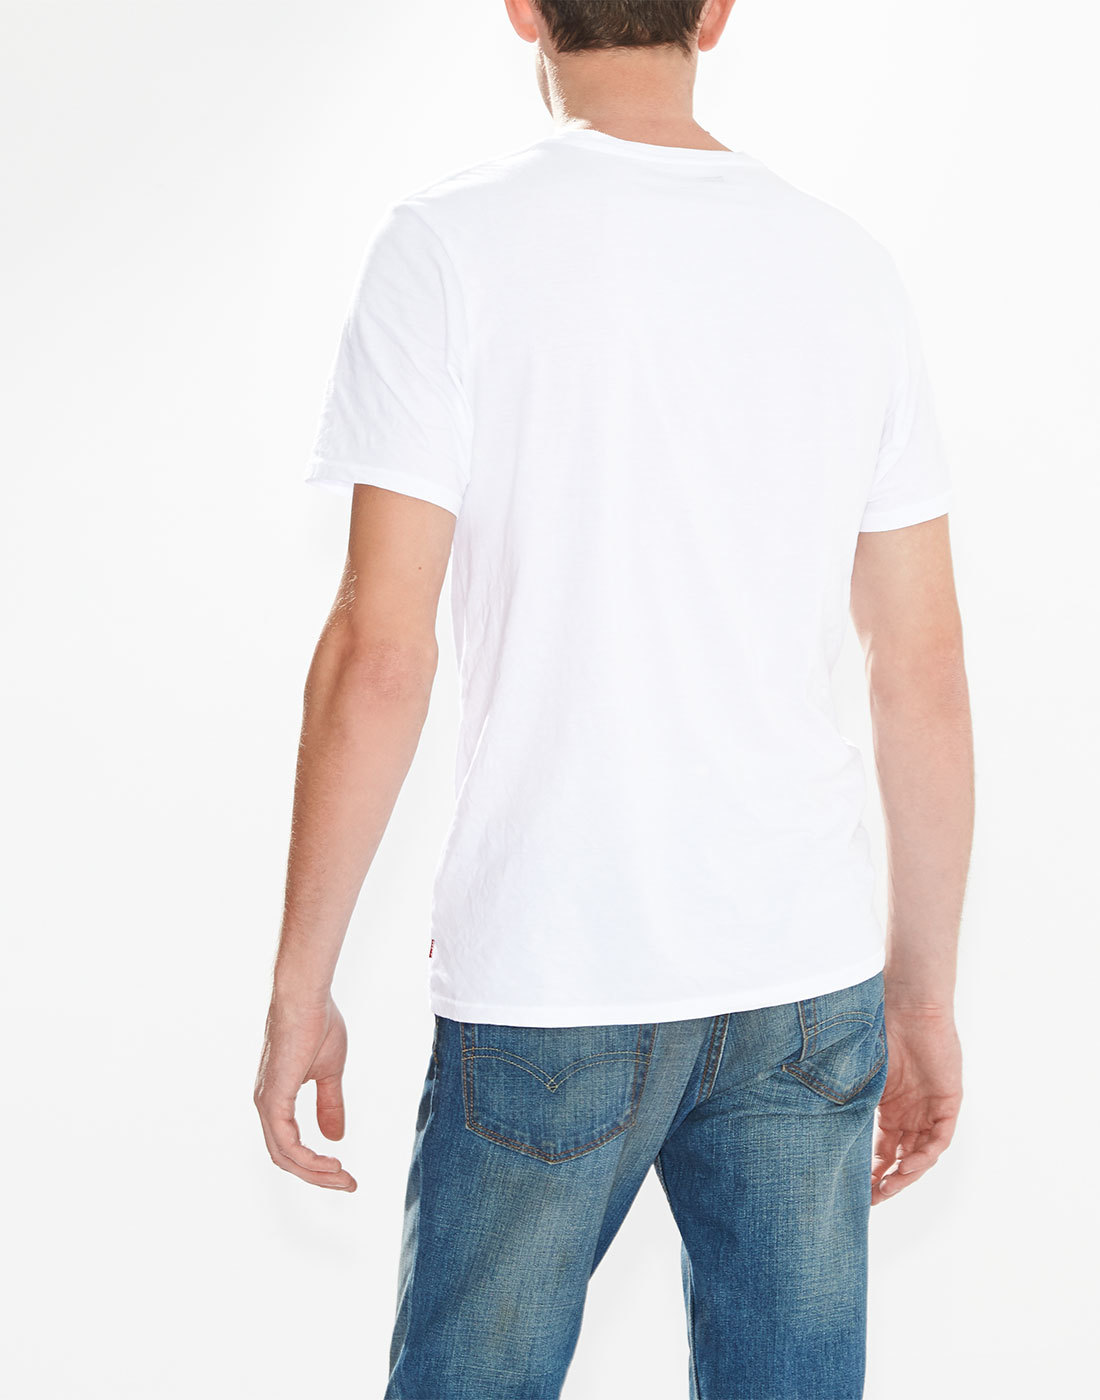 LEVI'S® Retro Mod Indie Classic Batwing Logo T-Shirt in White